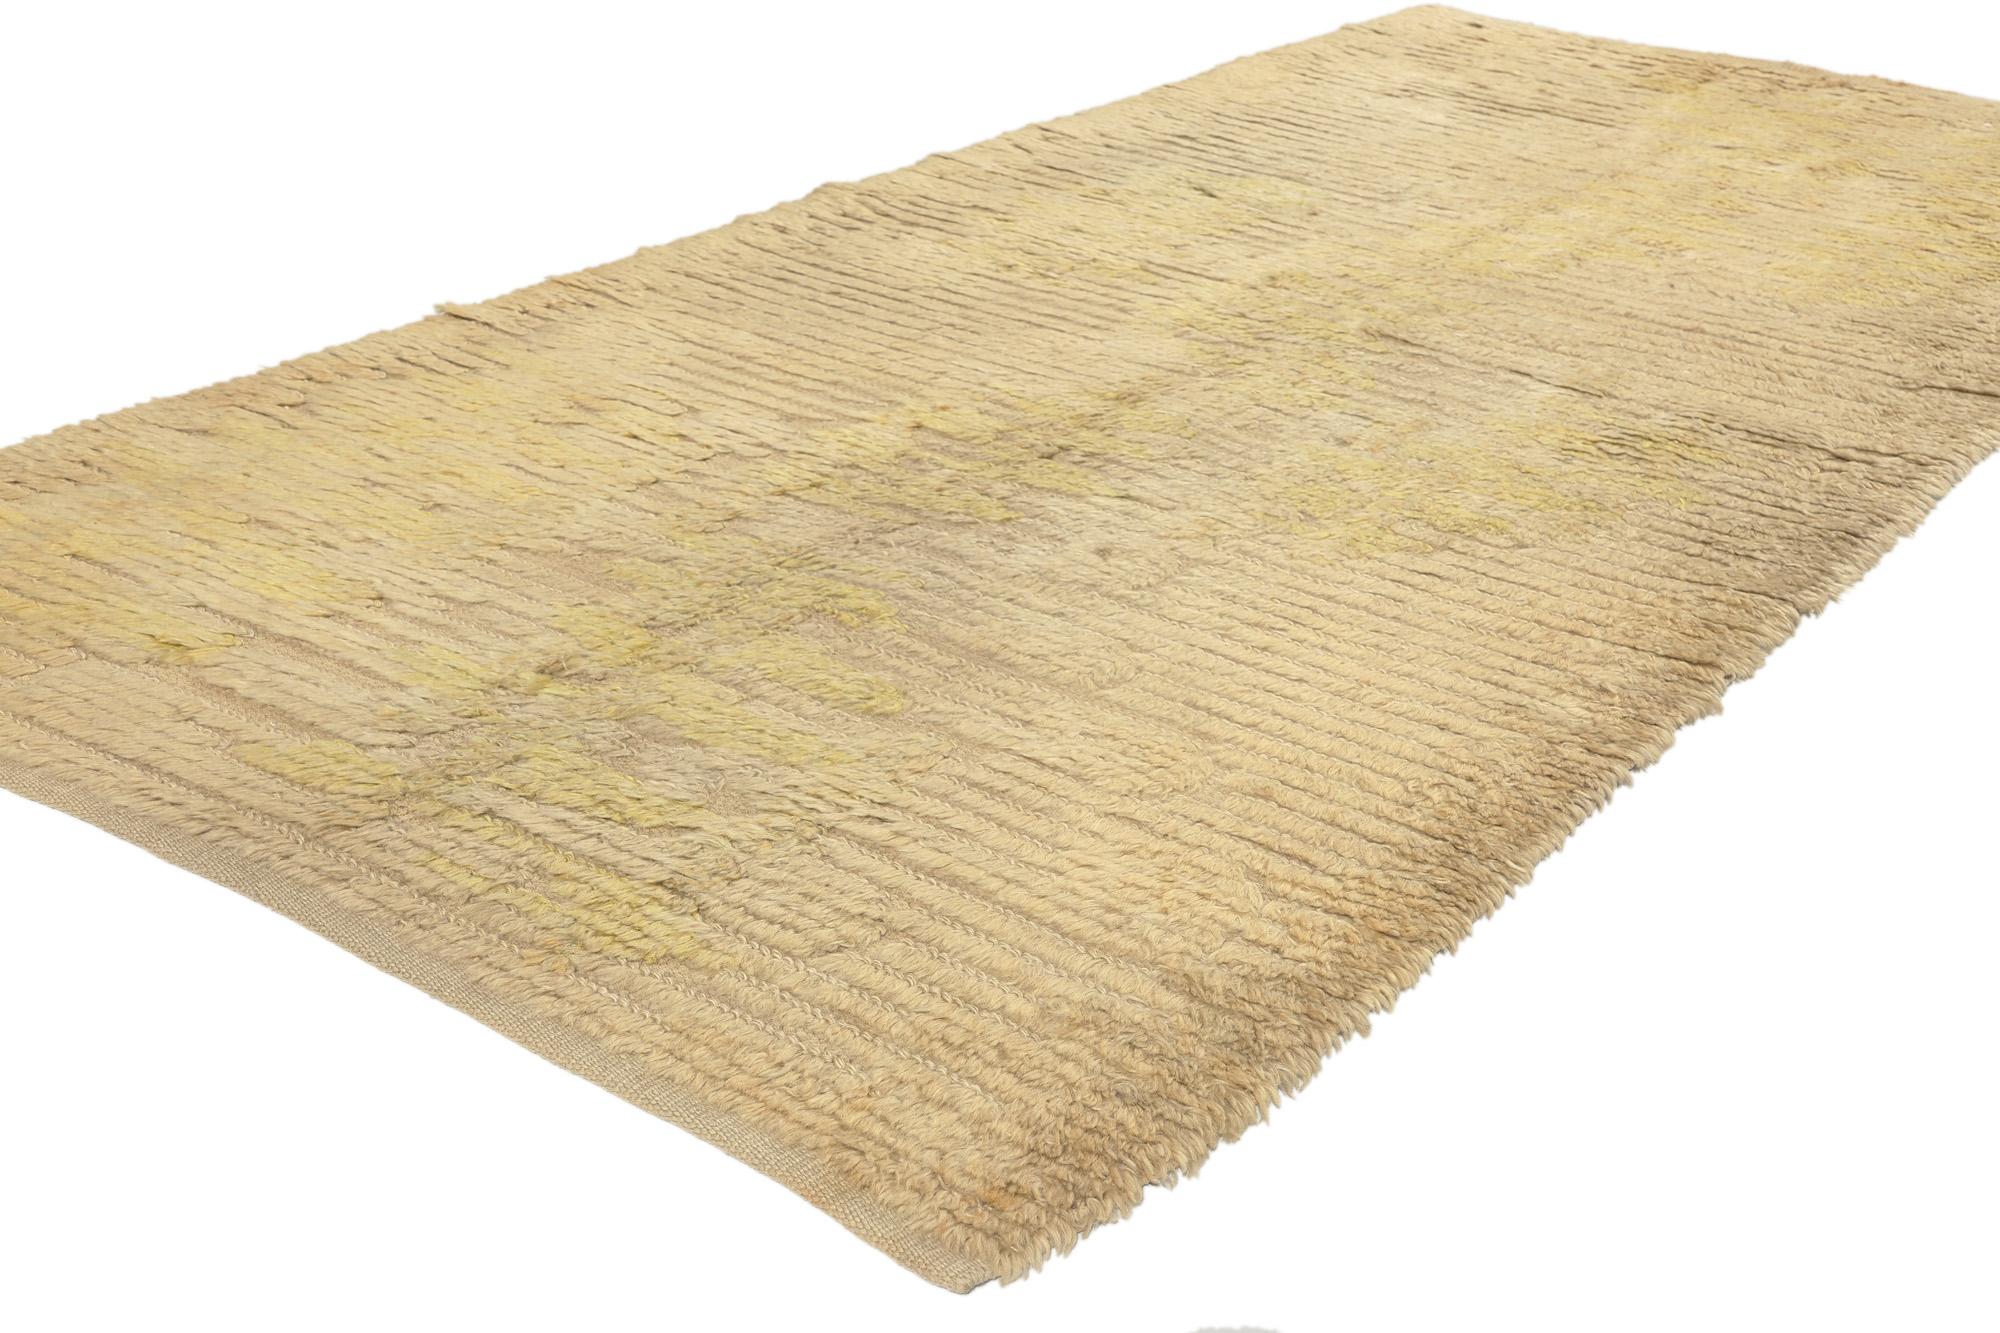 76938 Scandinavian Modern Vintage Swedish Rya Rug, 04'01 x 09'01. Swedish rya rugs are traditional Scandinavian rugs renowned for their long-pile wool and intricate designs, with a history dating back to the Viking Age. These rugs typically feature